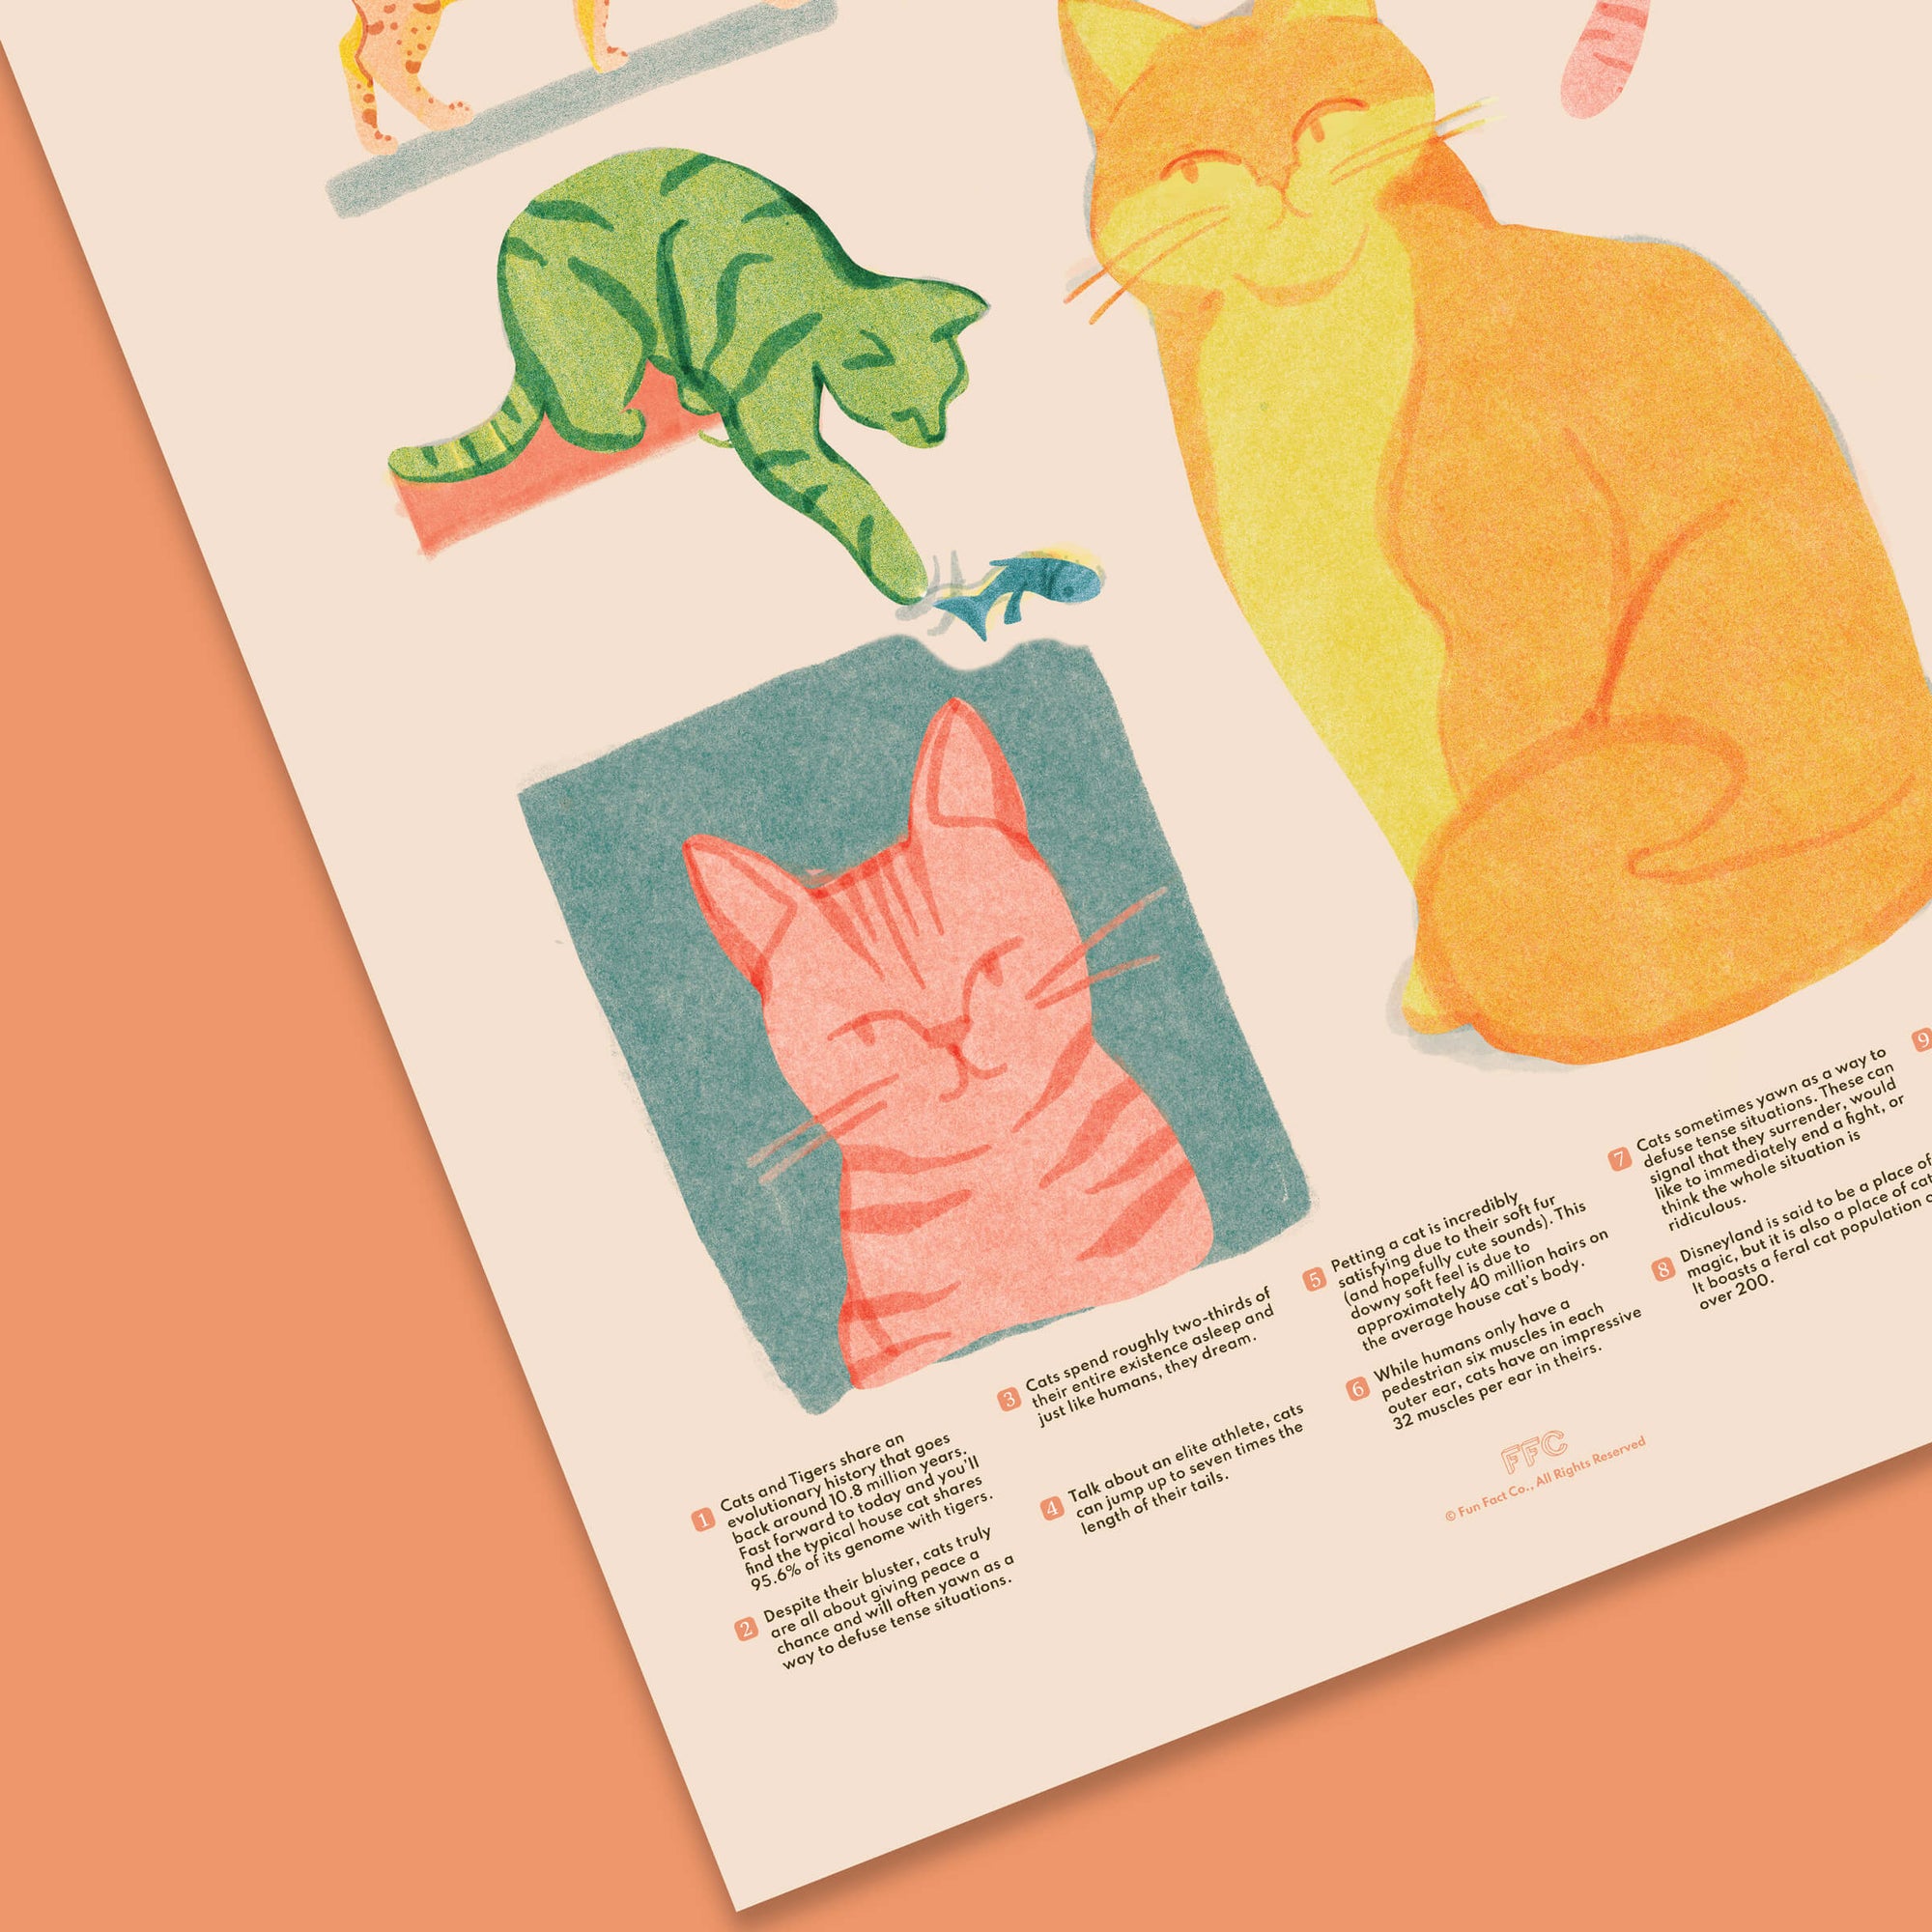 Cat Fun Facts Print, Educational Illustrated Poster by Fun Fact Co - Feline Close Up